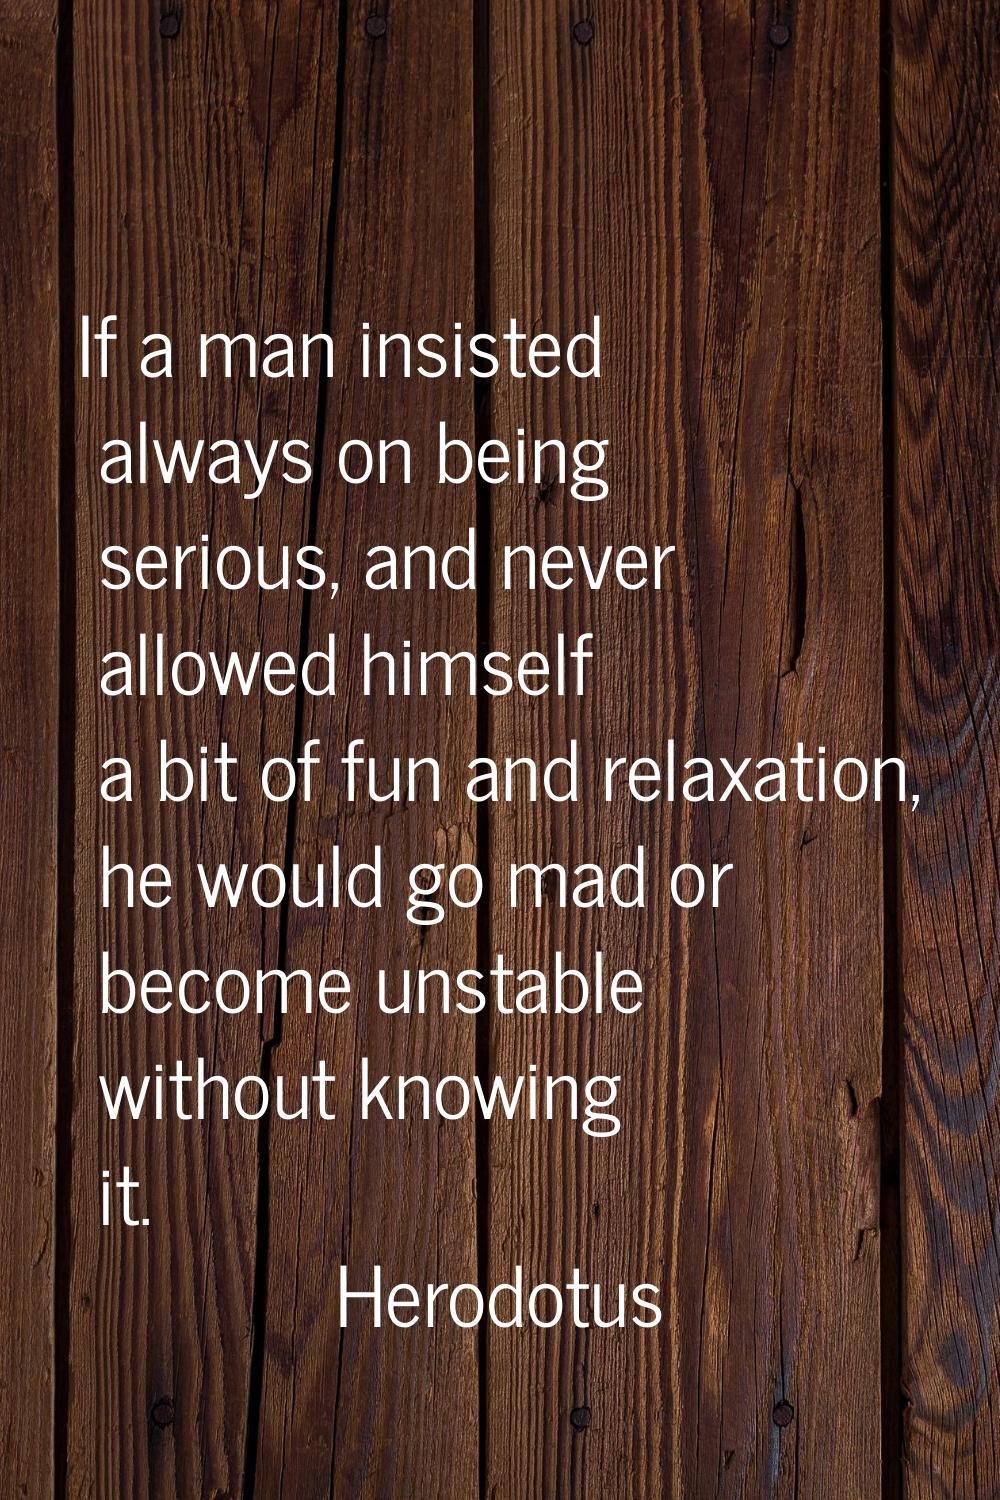 If a man insisted always on being serious, and never allowed himself a bit of fun and relaxation, h